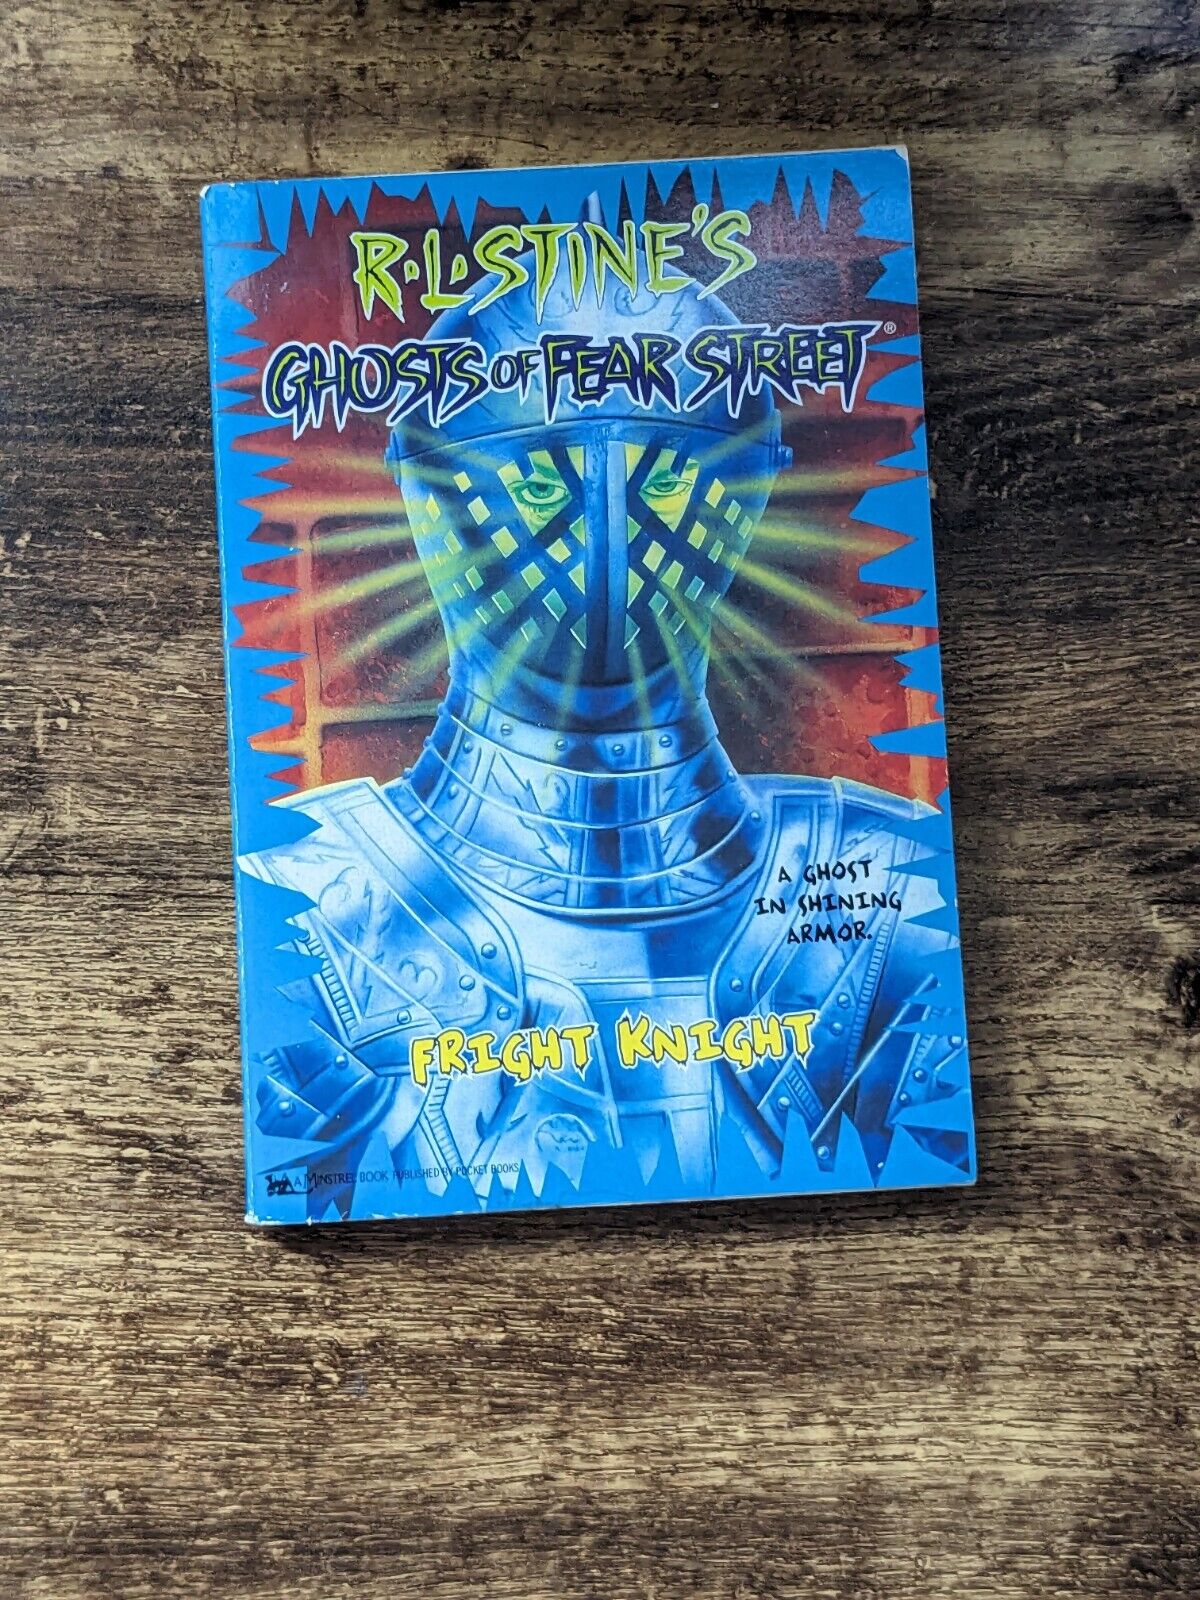 Fright Knight (Ghosts of Fear Street #7) by R. L. Stine (1996, Trade Paperback) Vintage - Asylum Books